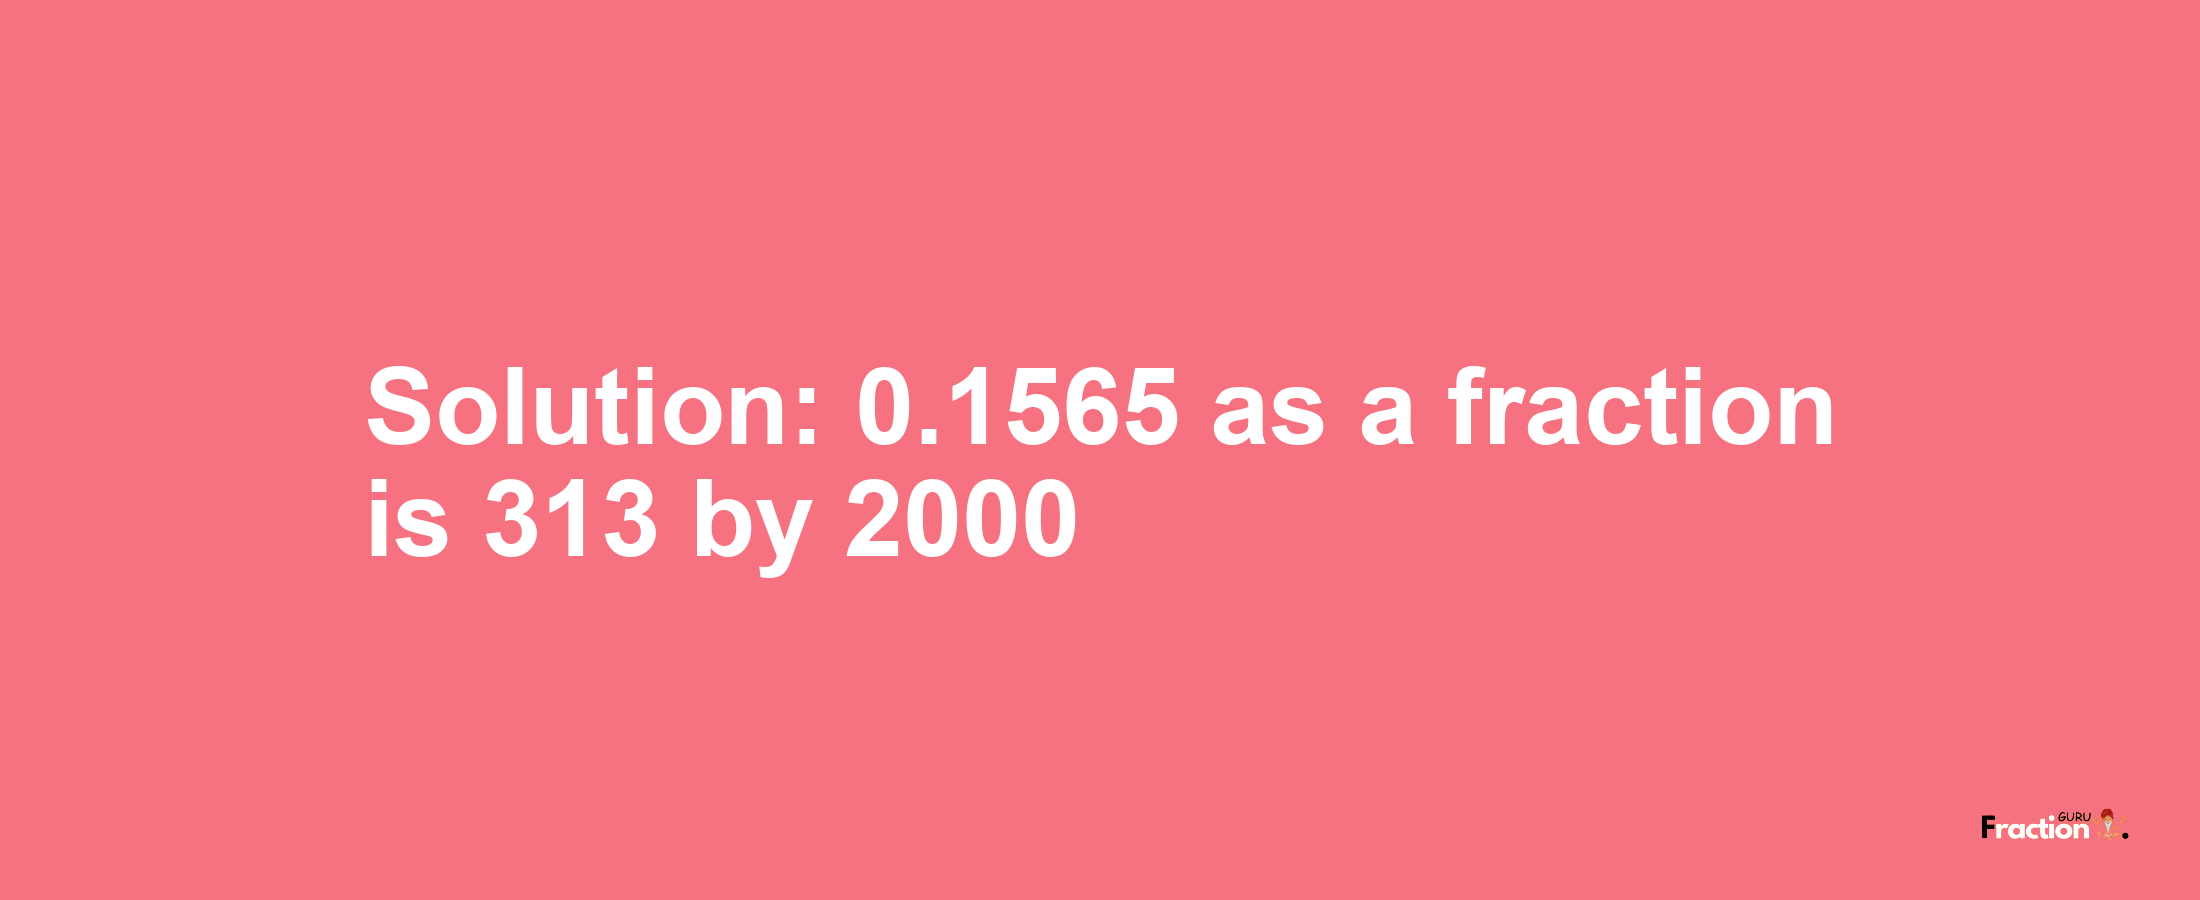 Solution:0.1565 as a fraction is 313/2000